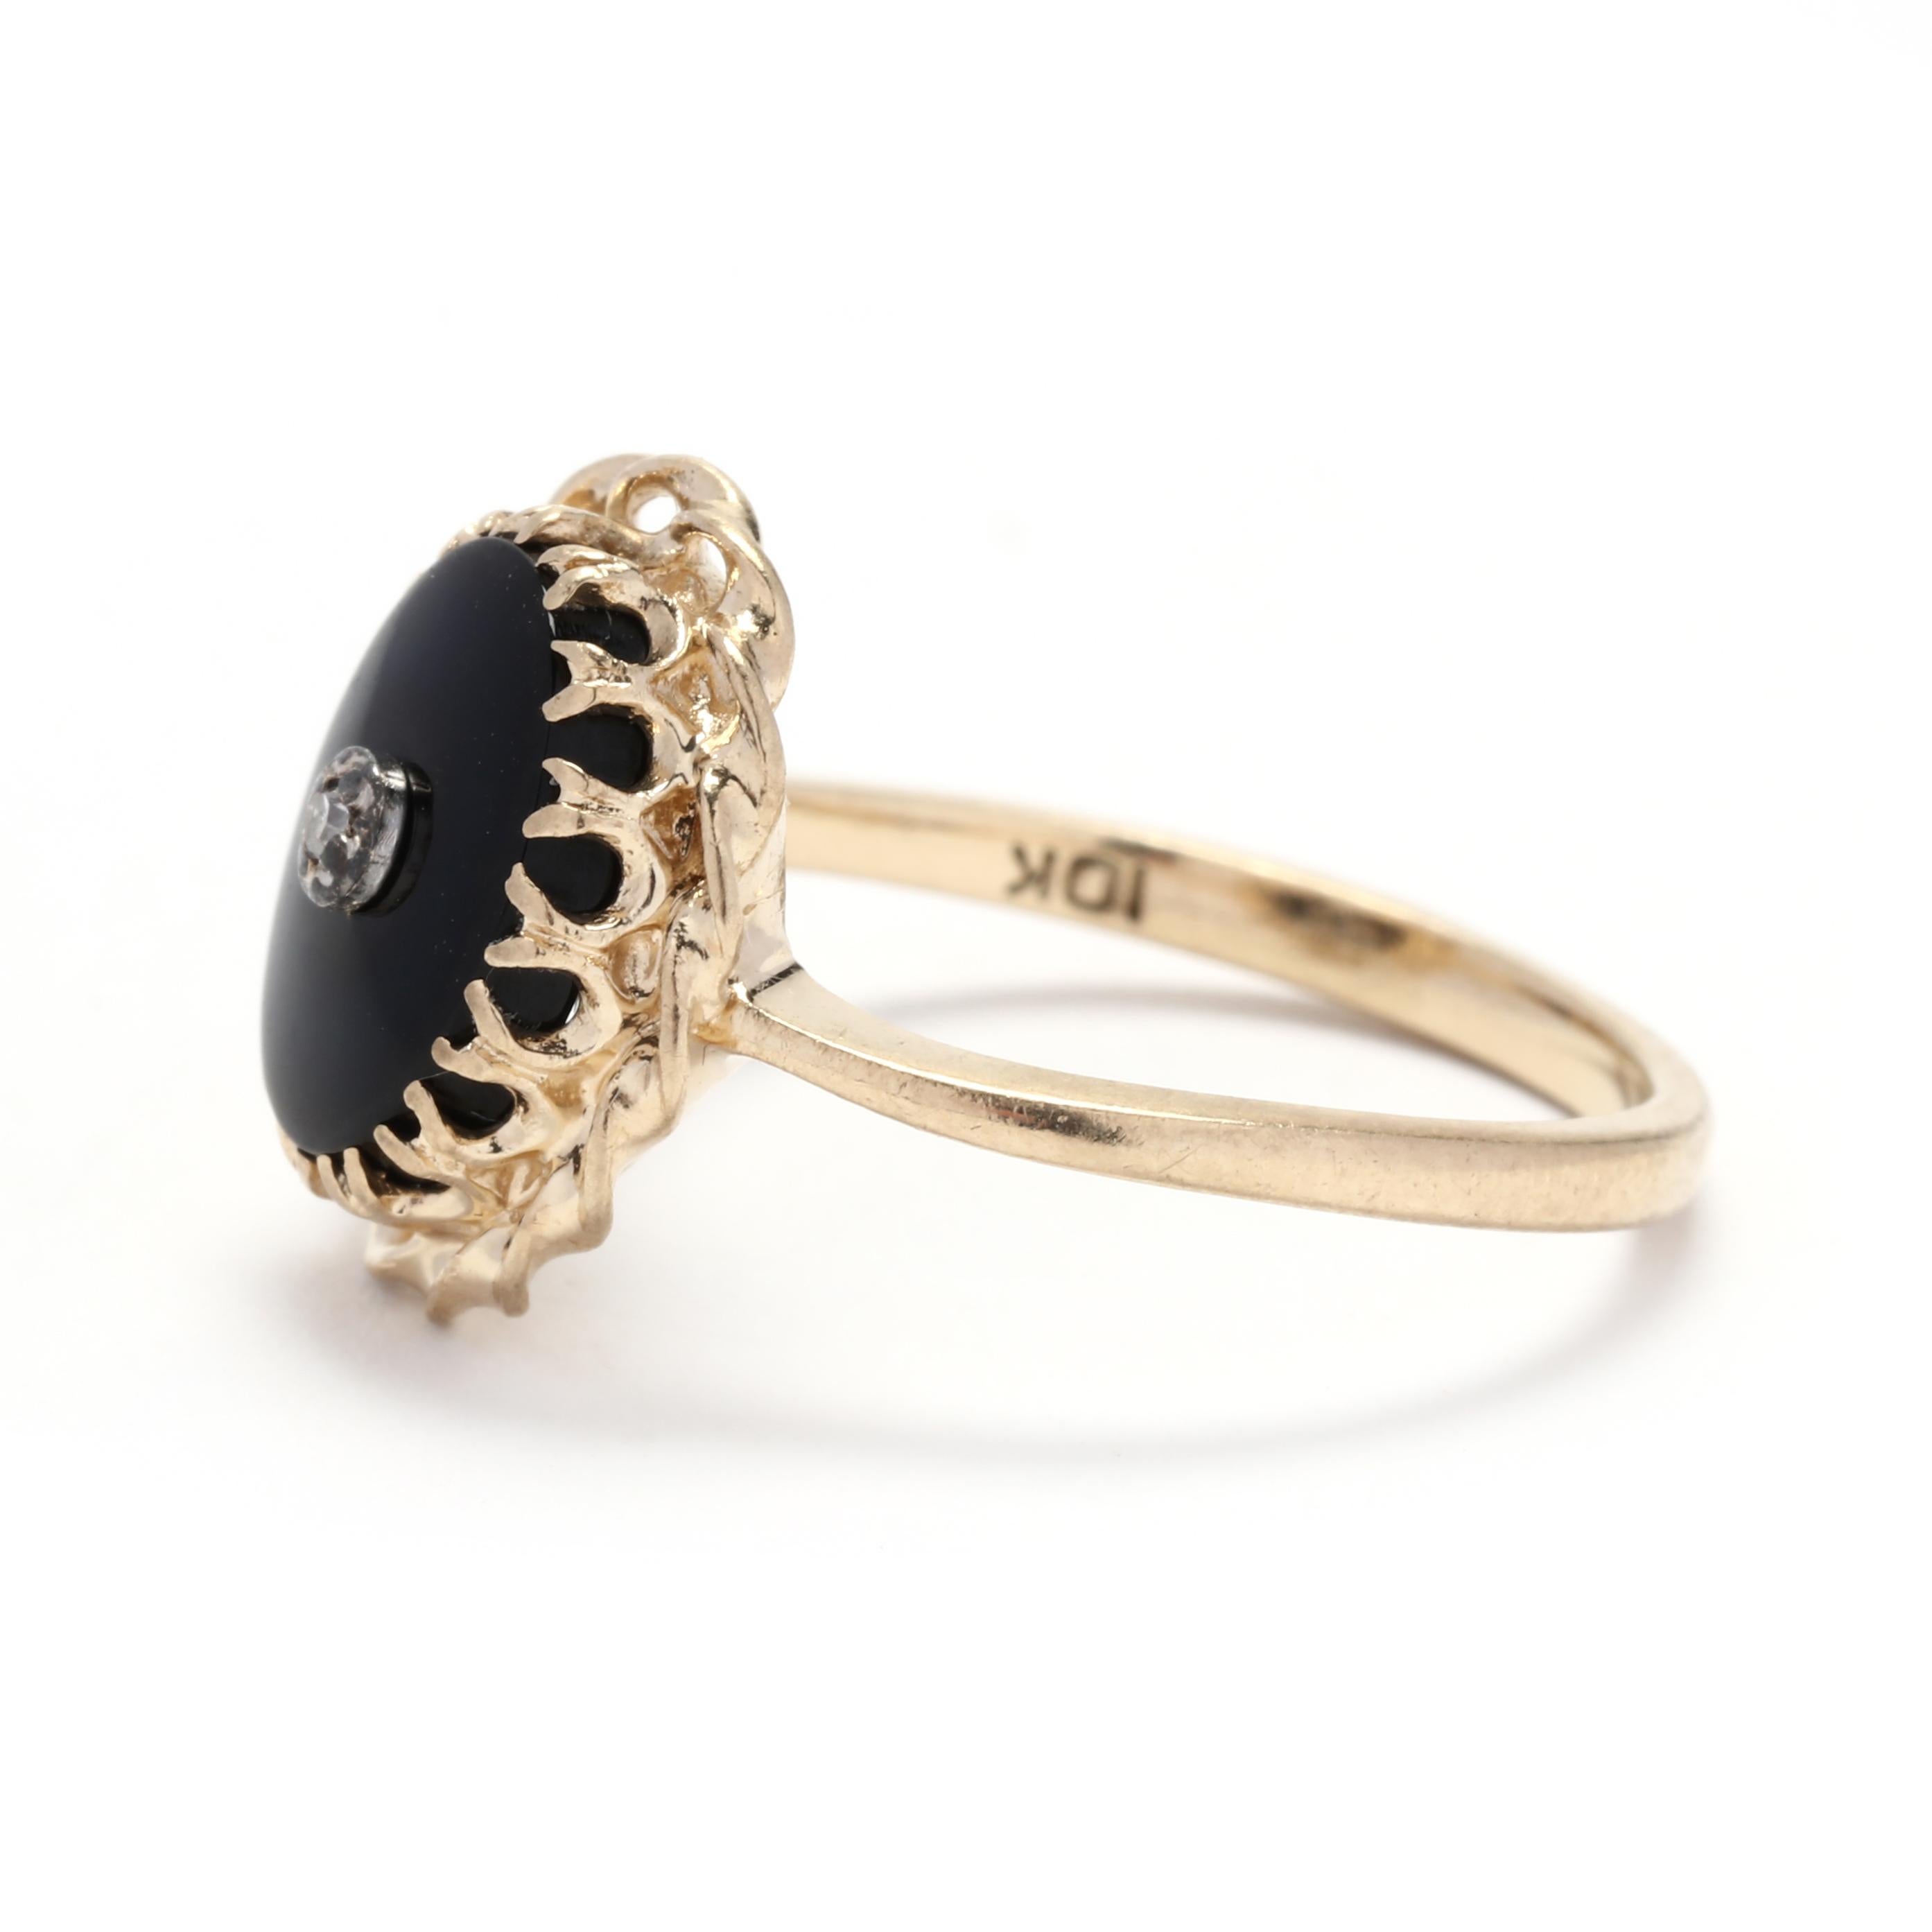 Oval Cut Diamond and Black Onyx Oval Ring, 10k Yellow Gold, Ring Size 5.5, Fancy Ring 